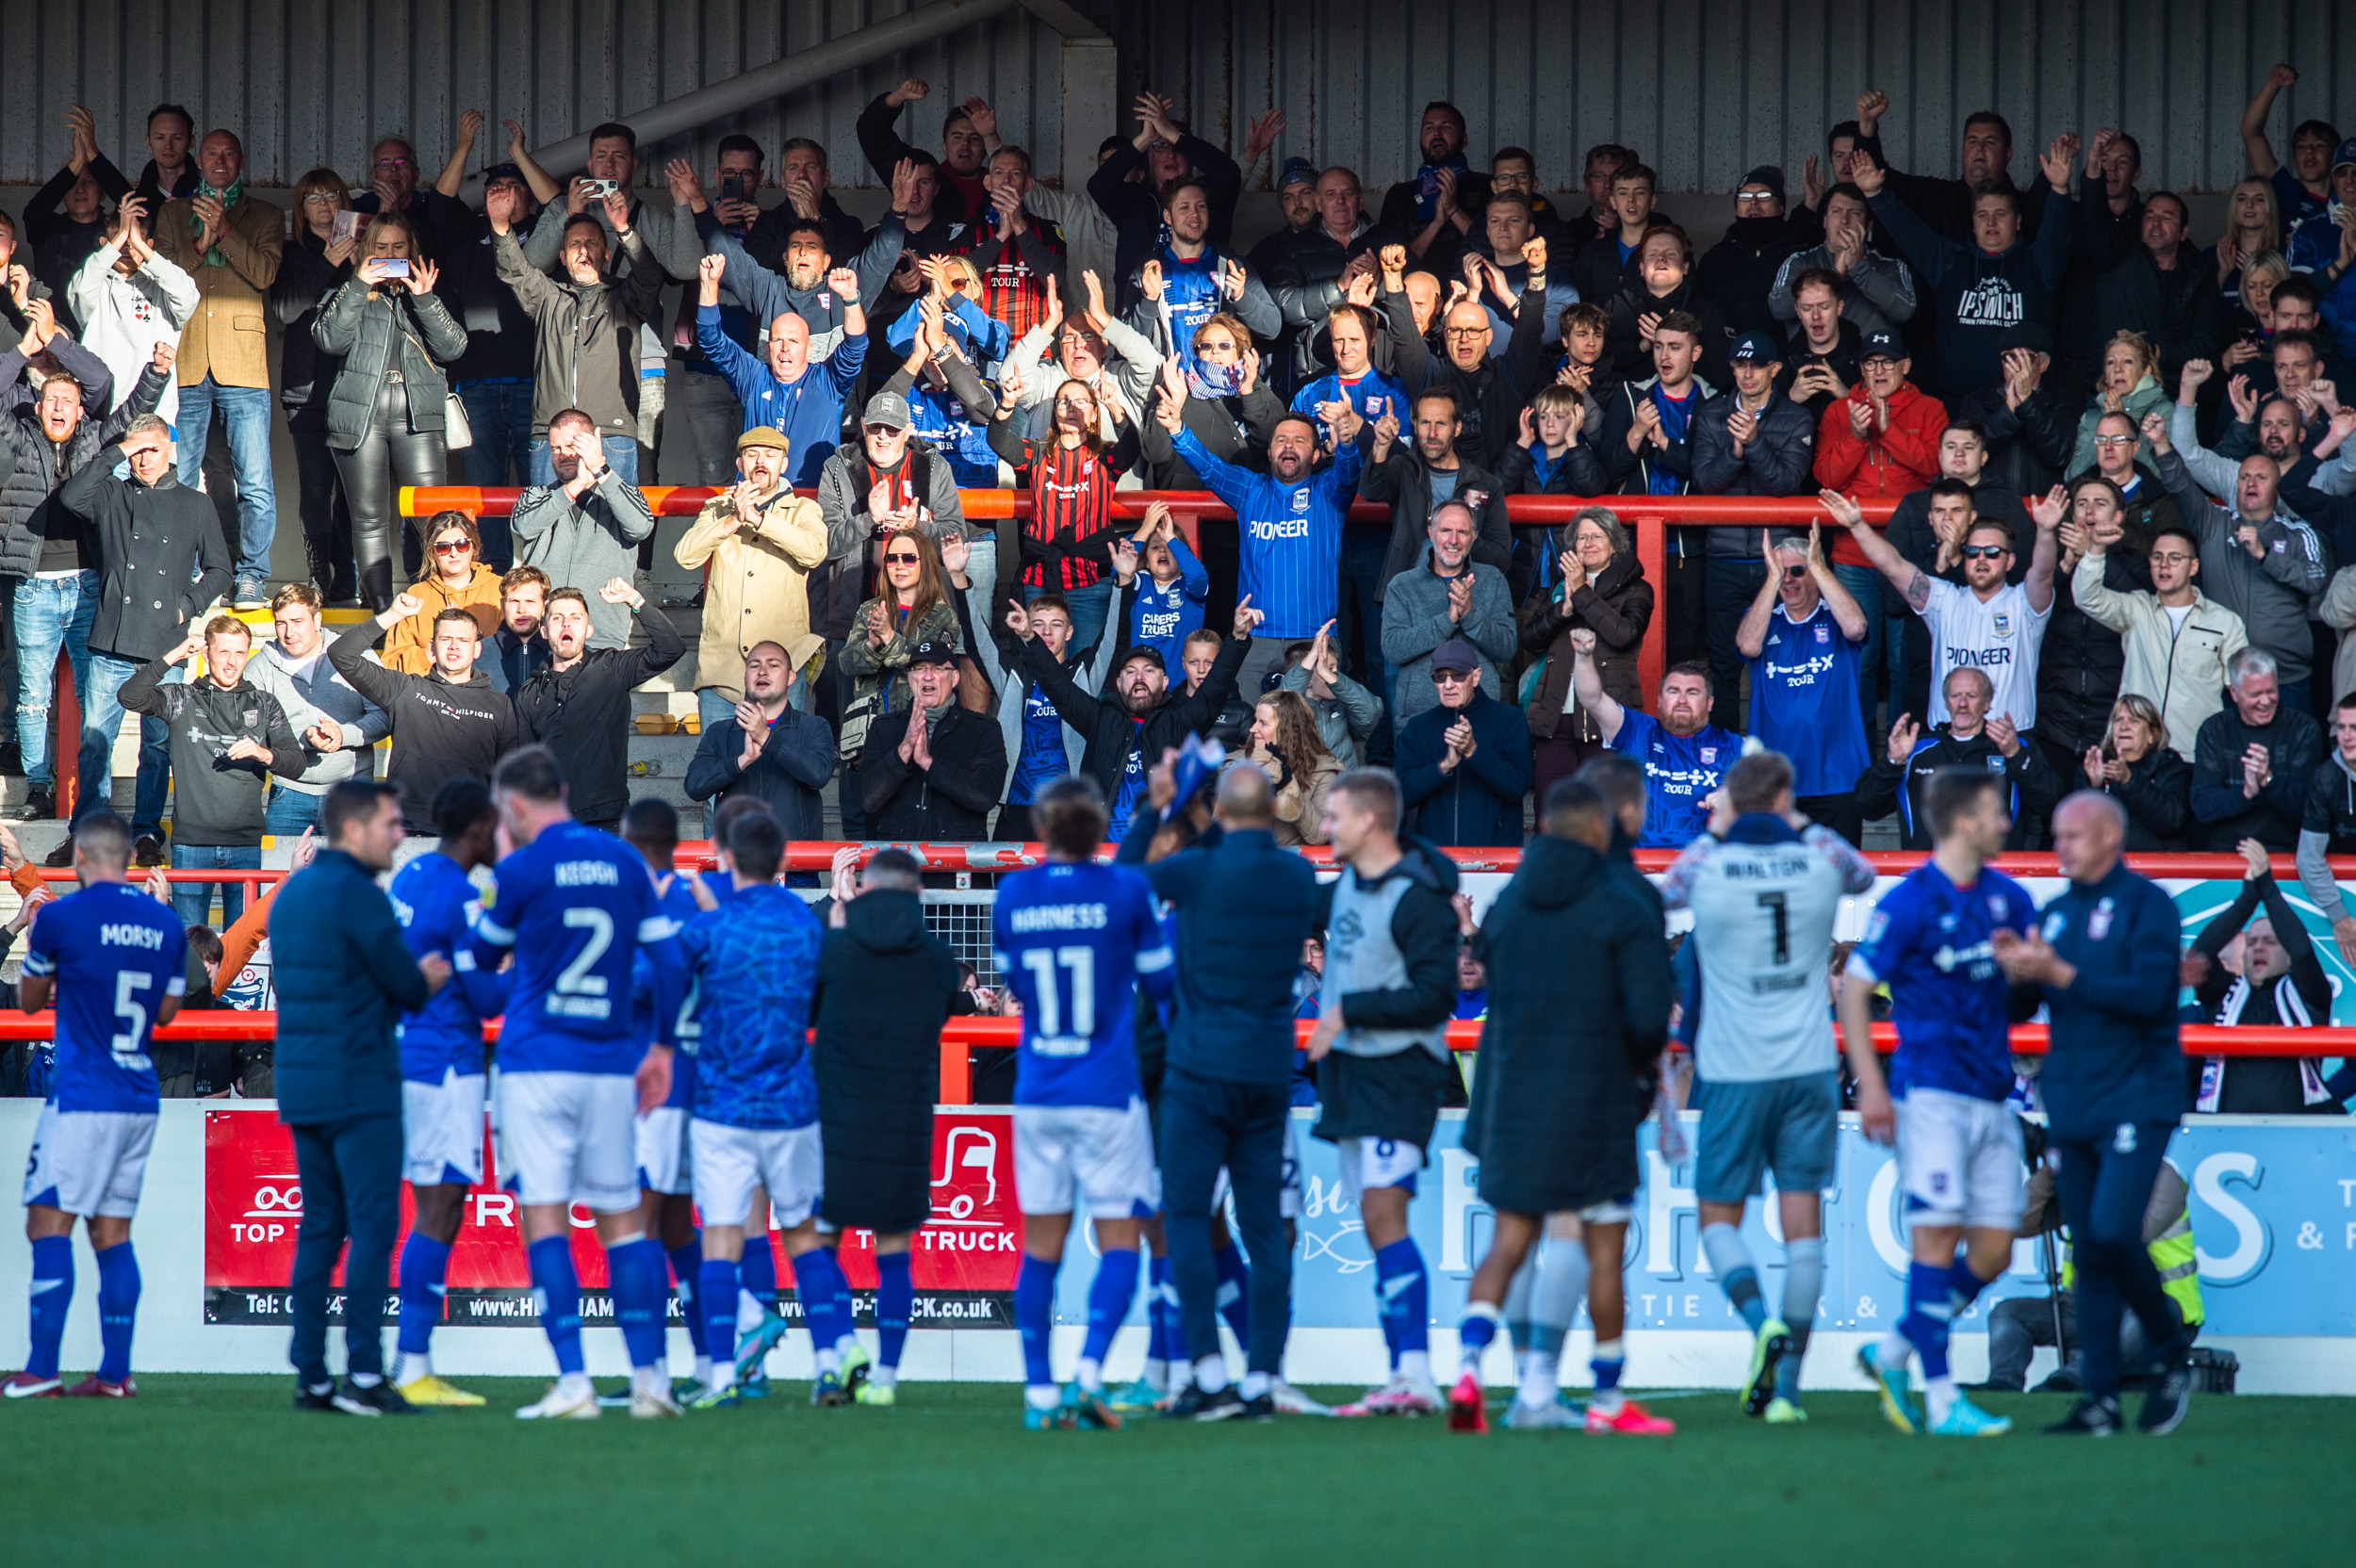 Ipswich Town fans celebrate beating Morecambe to improve their promotion credentials